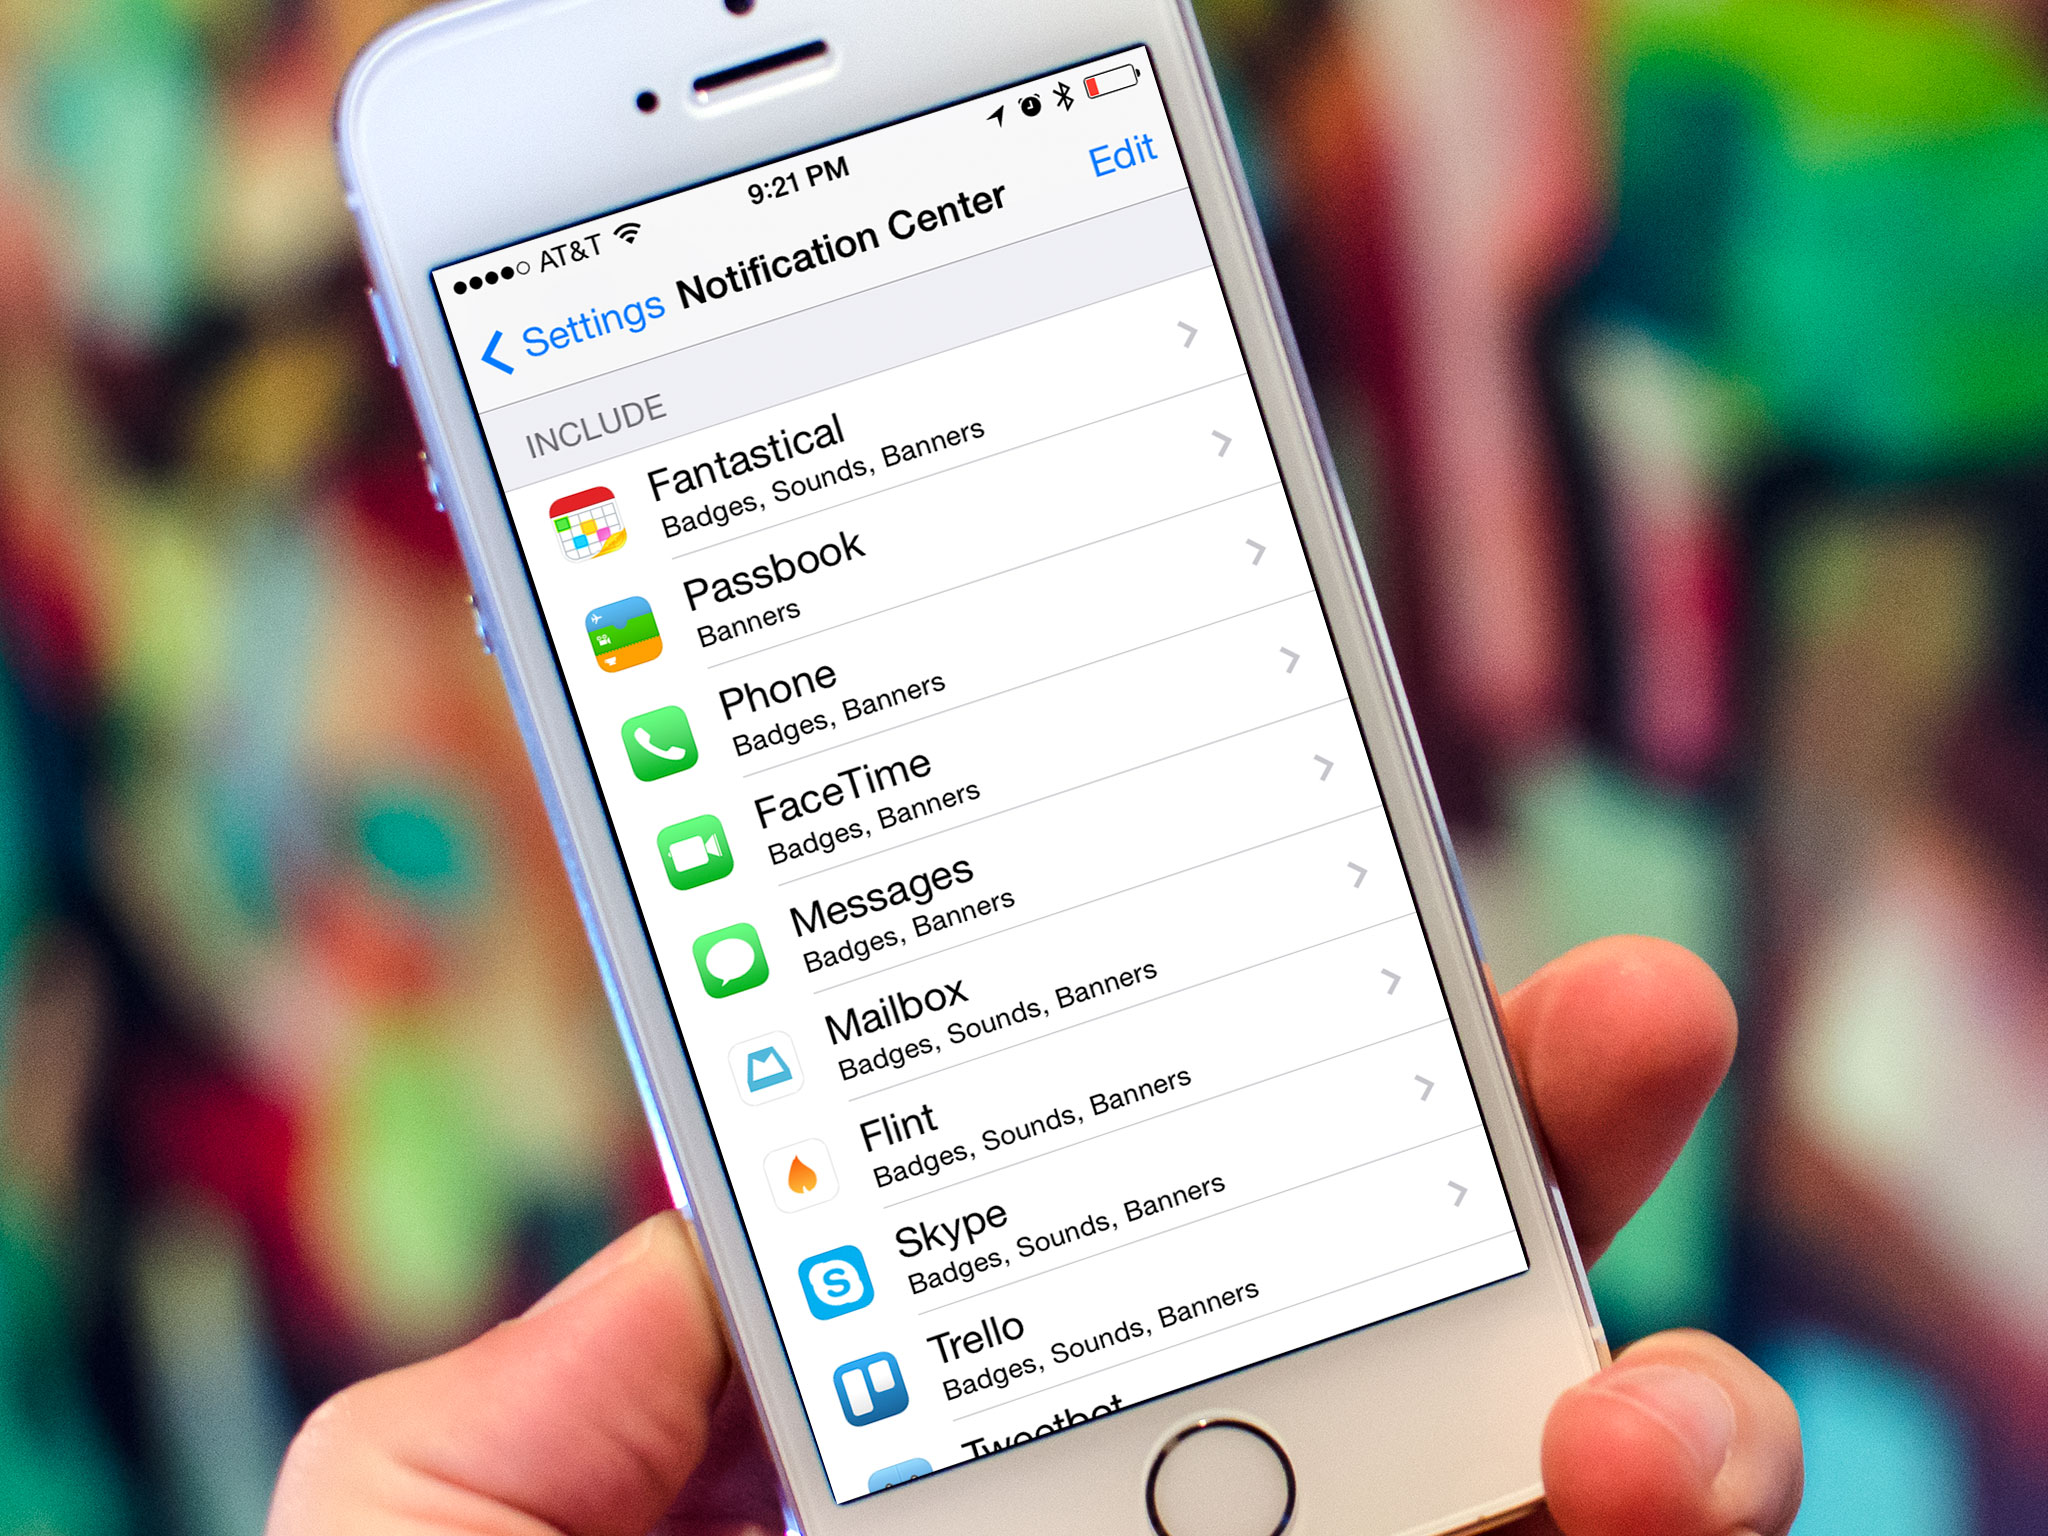 Want to save iPhone and iPad battery life? Start with Notification Center!